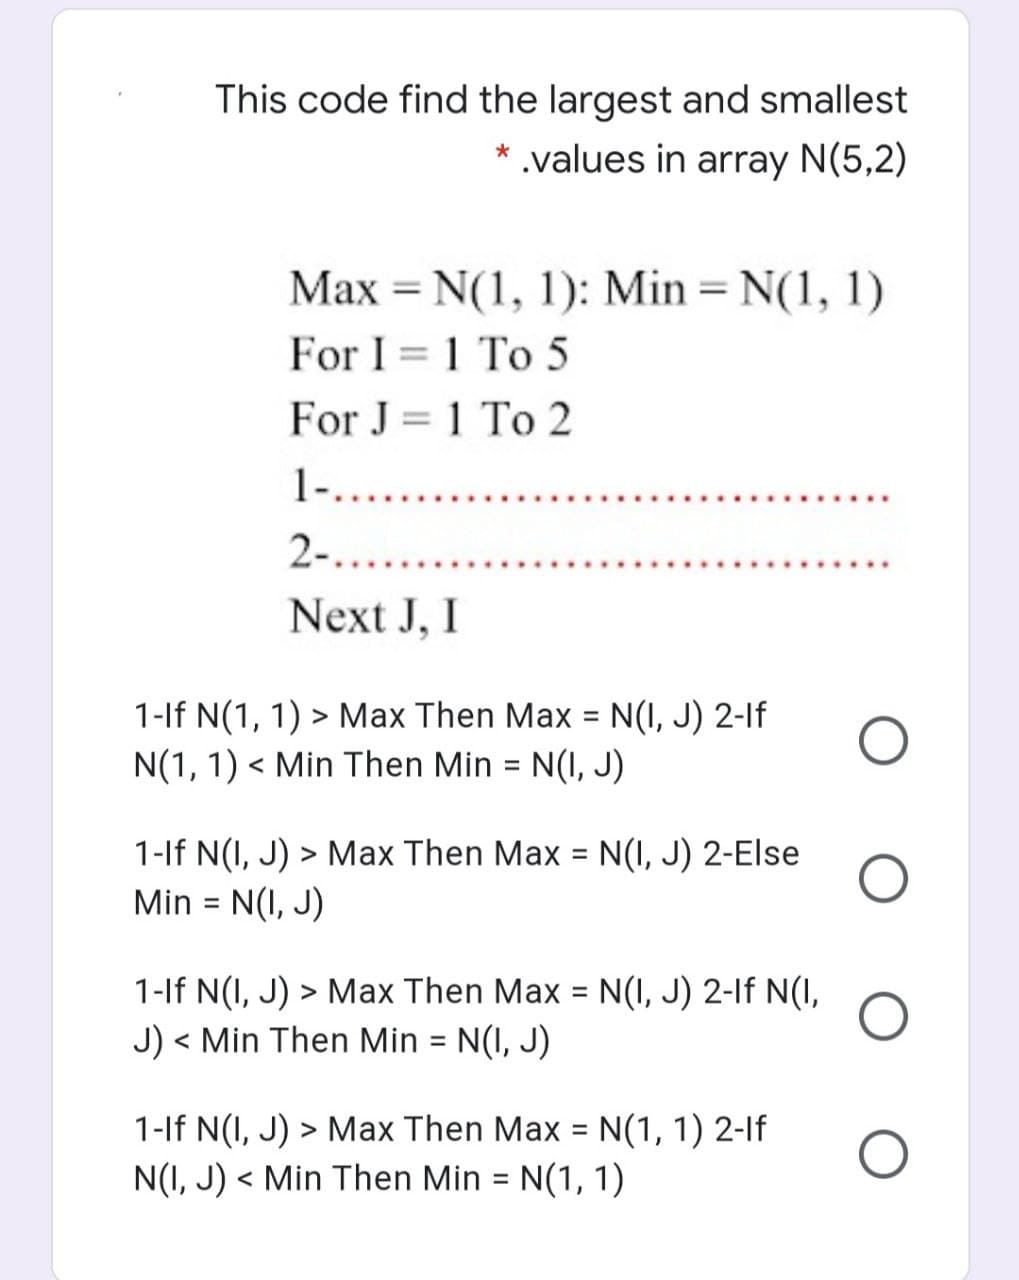 This code find the largest and smallest
* .values in array N(5,2)
Max = N(1, 1): Min = N(1, 1)
For I = 1 To 5
For J = 1 To 2
1-....
2-.....
Next J, I
1-lf N(1, 1) > Max Then Max = N(I, J) 2-If
N(1, 1) < Min Then Min = N(I, J)
%3D
1-lf N(I, J) > Max Then Max = N(I, J) 2-Else
N(I, J)
Min
%D
1-lf N(I, J) > Max Then Max = N(I, J) 2-If N(I,
J) < Min Then Min = N(I, J)
%3D
く
1-lf N(I, J) > Max Then Max = N(1, 1) 2-lf
N(I, J) < Min Then Min = N(1, 1)
%3D
